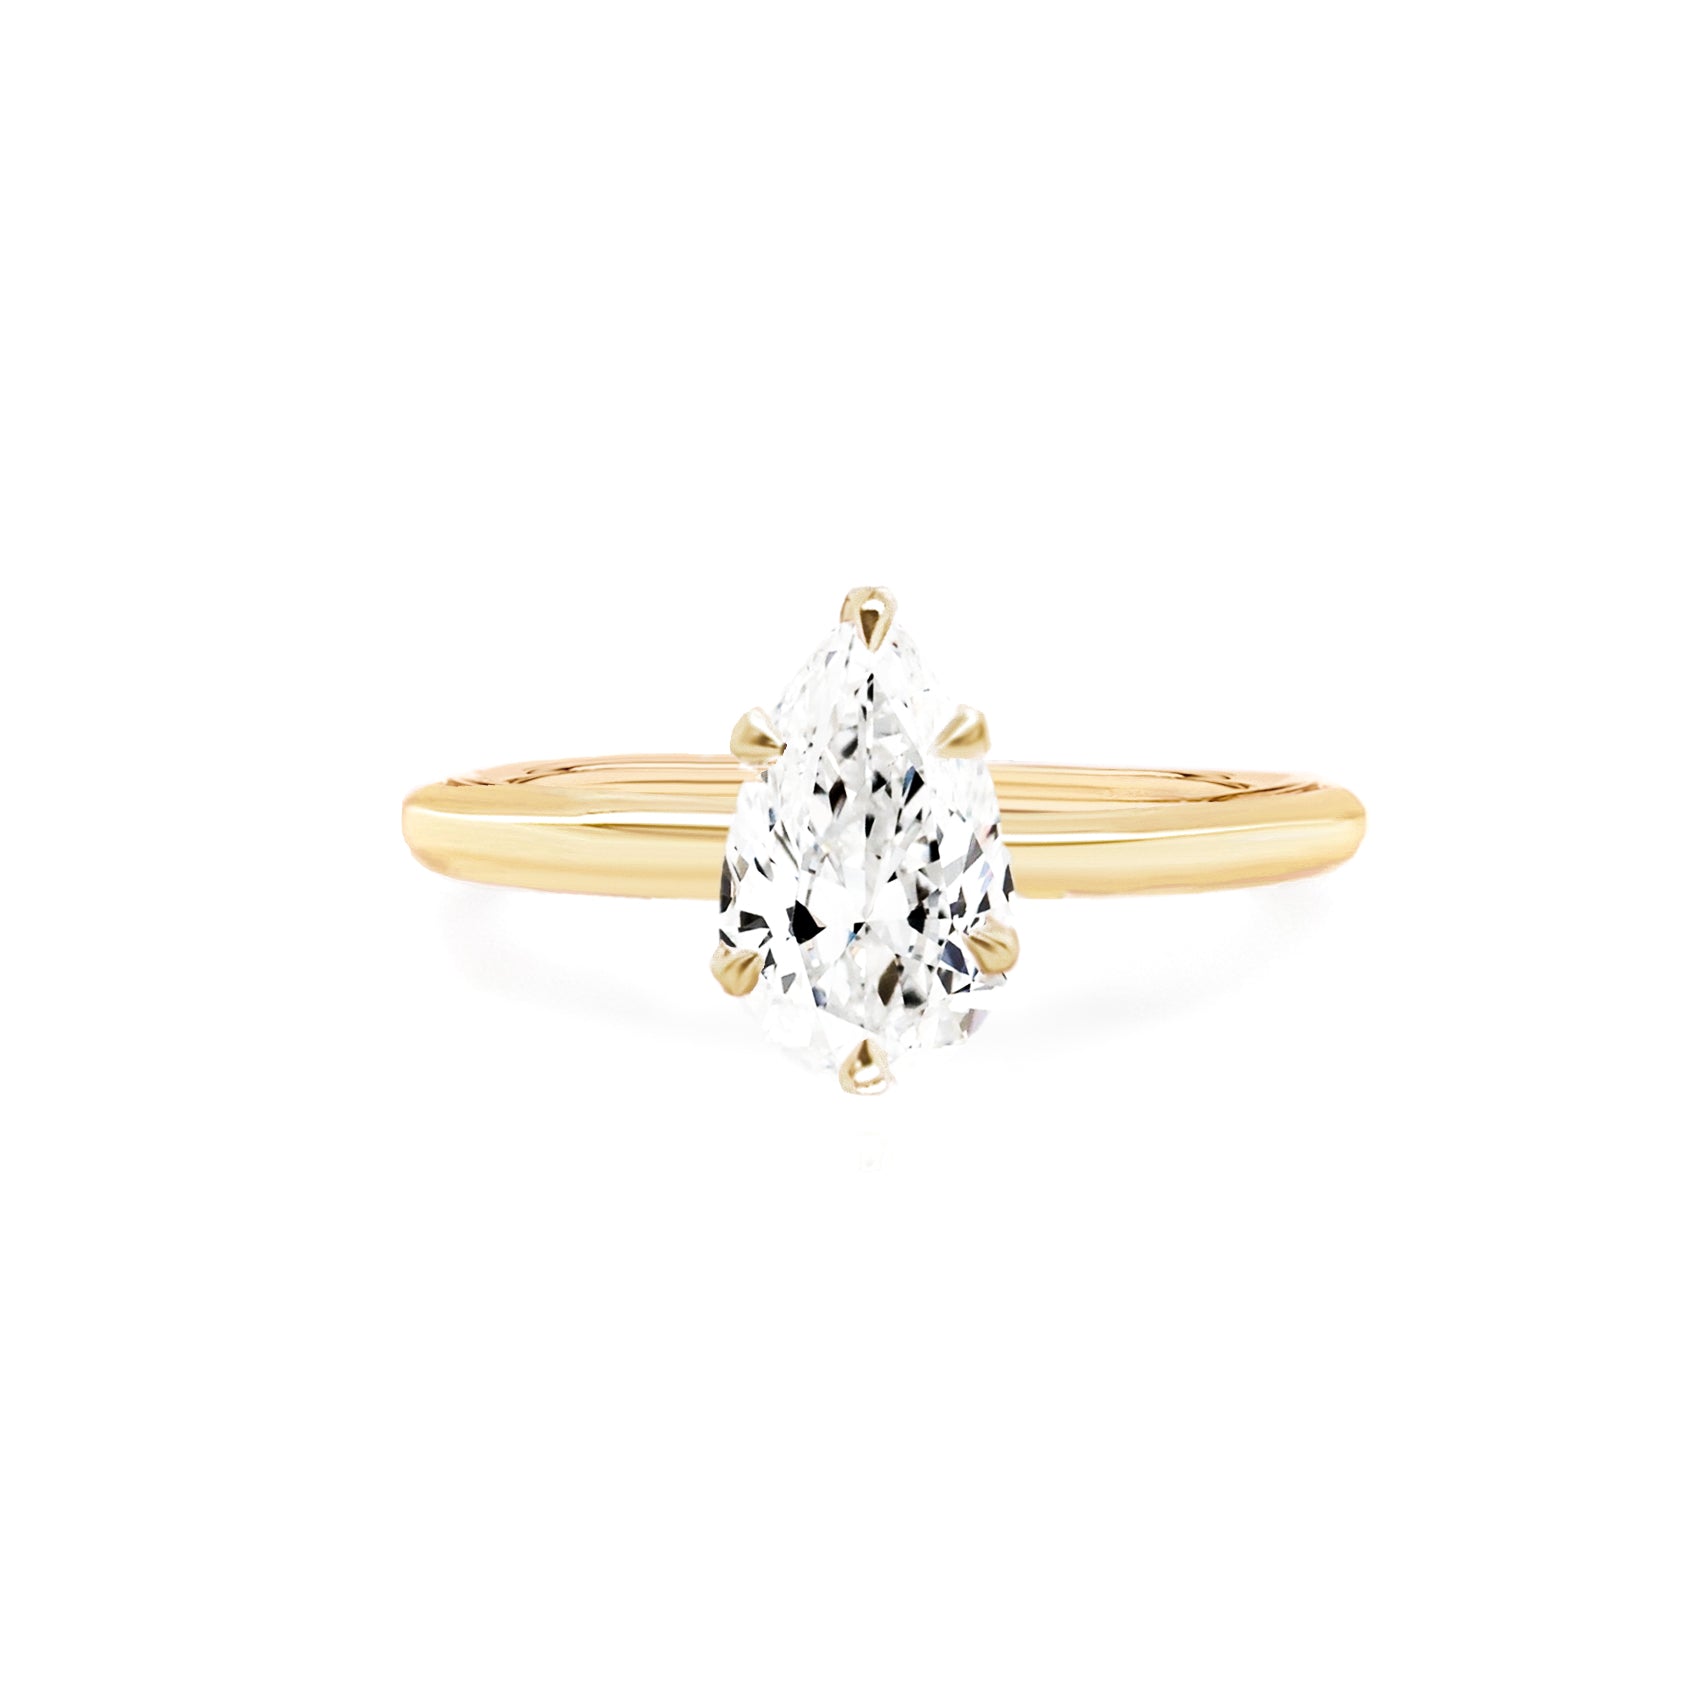 Majestic Marcella Engagement Ring